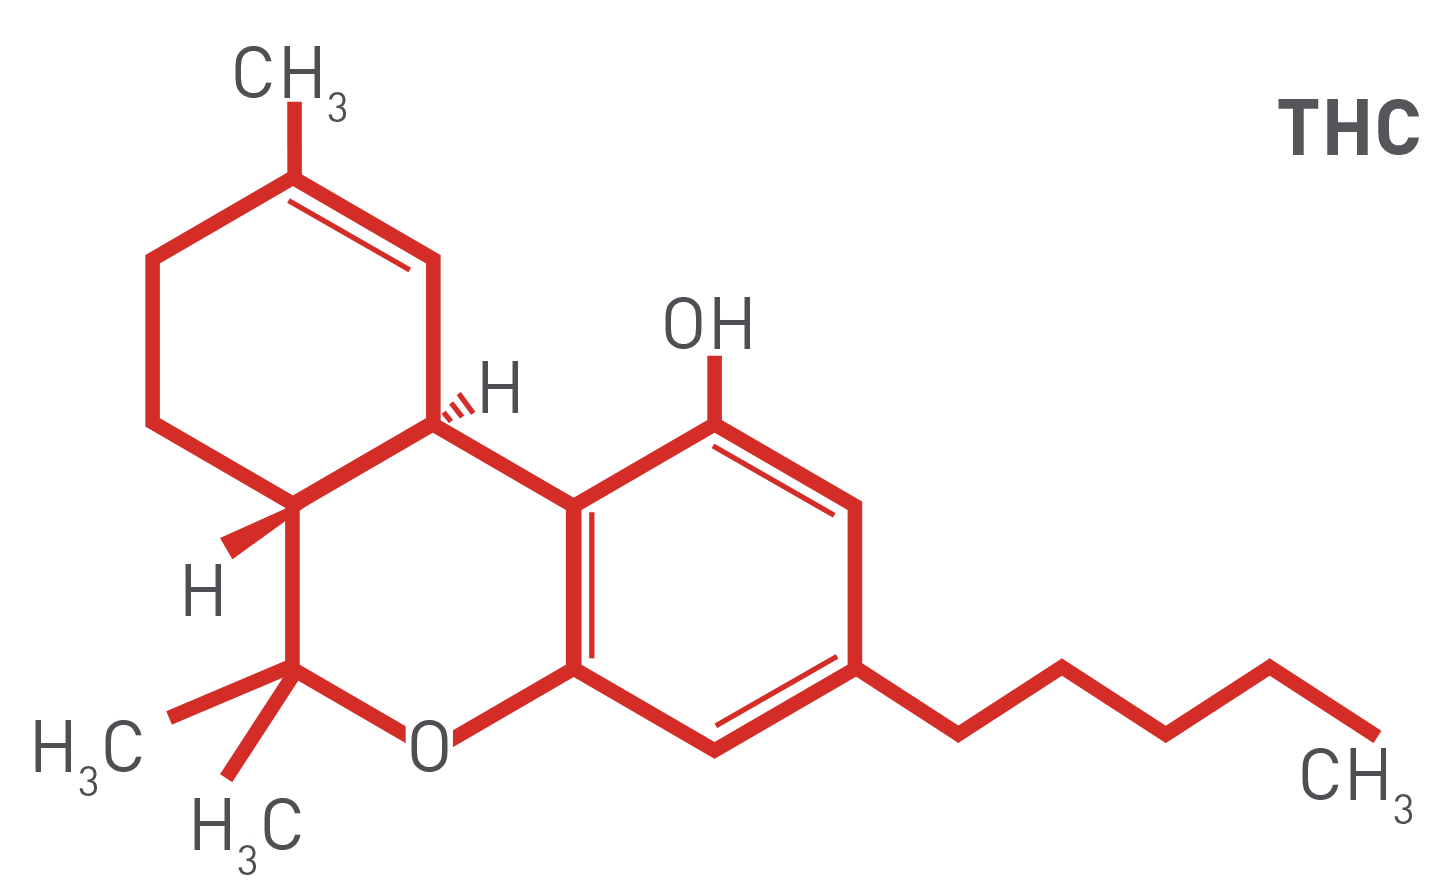 THC chemical compound